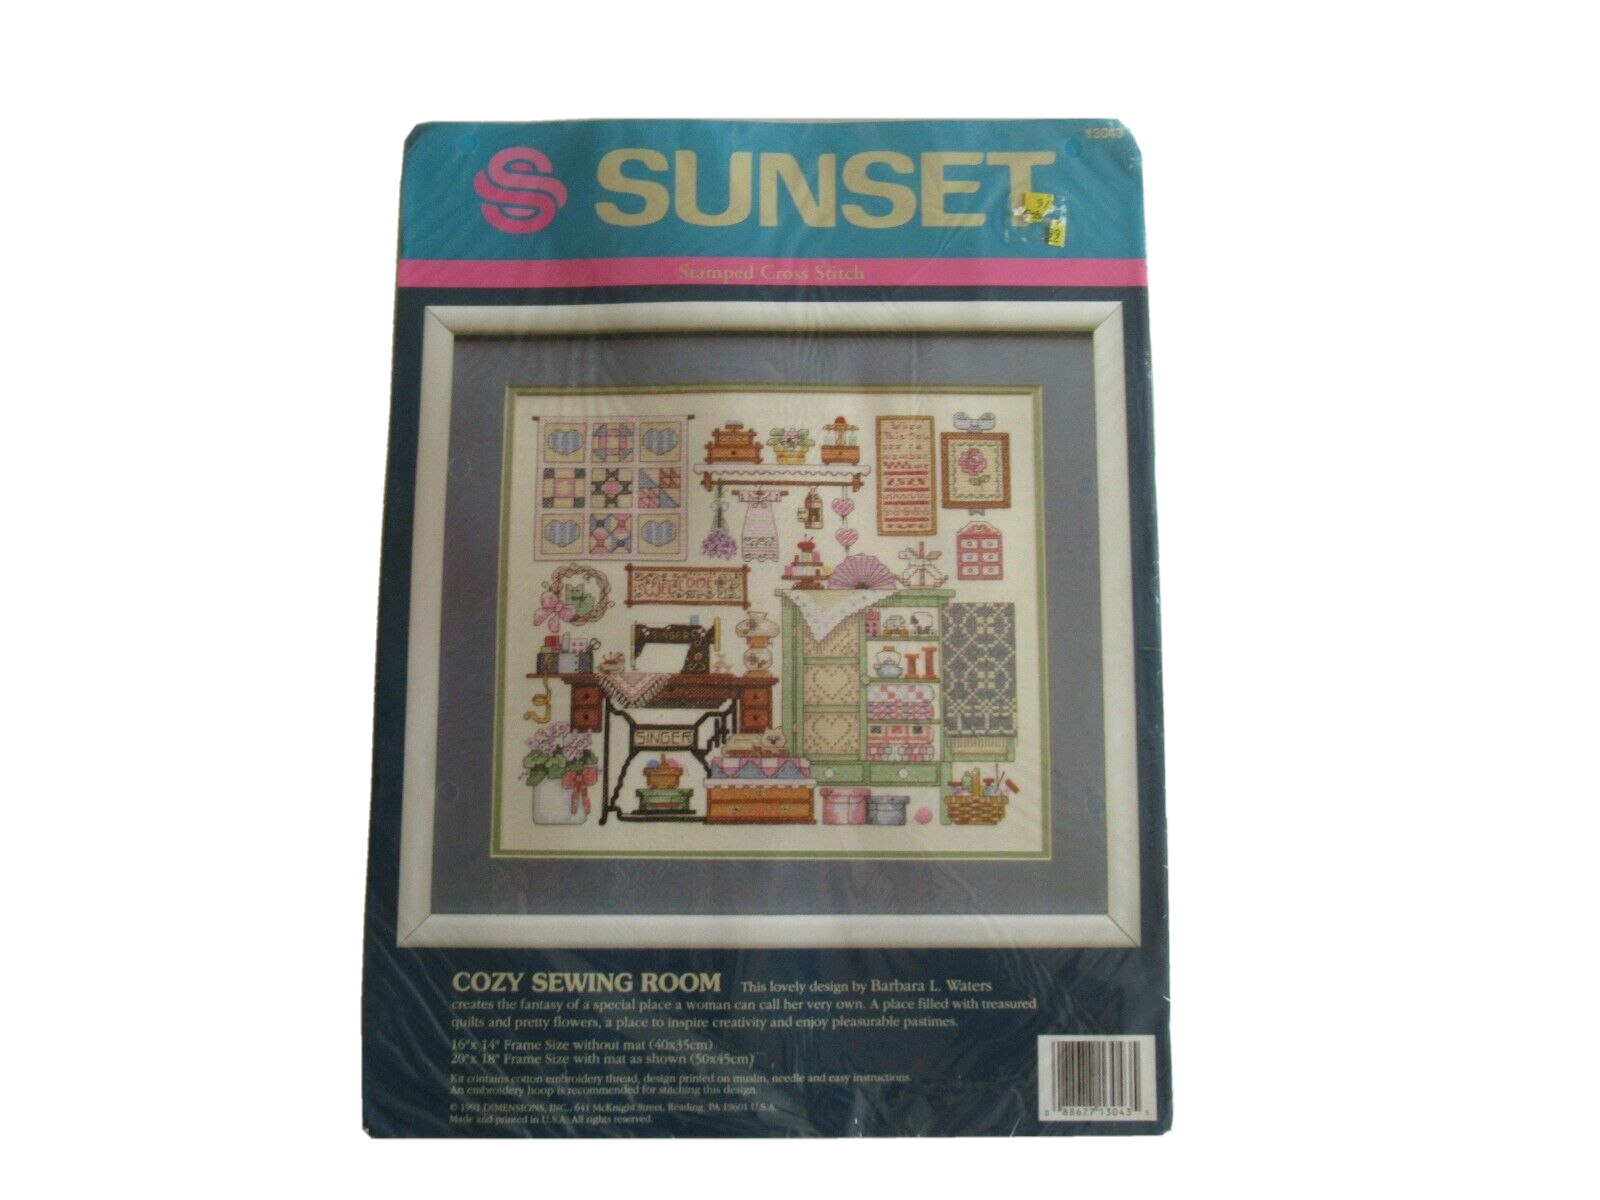 Vtg Sunset Stamped Cross Stitch Kit Dimensions 1991 Cozy Sewing Room B. Waters - $19.00